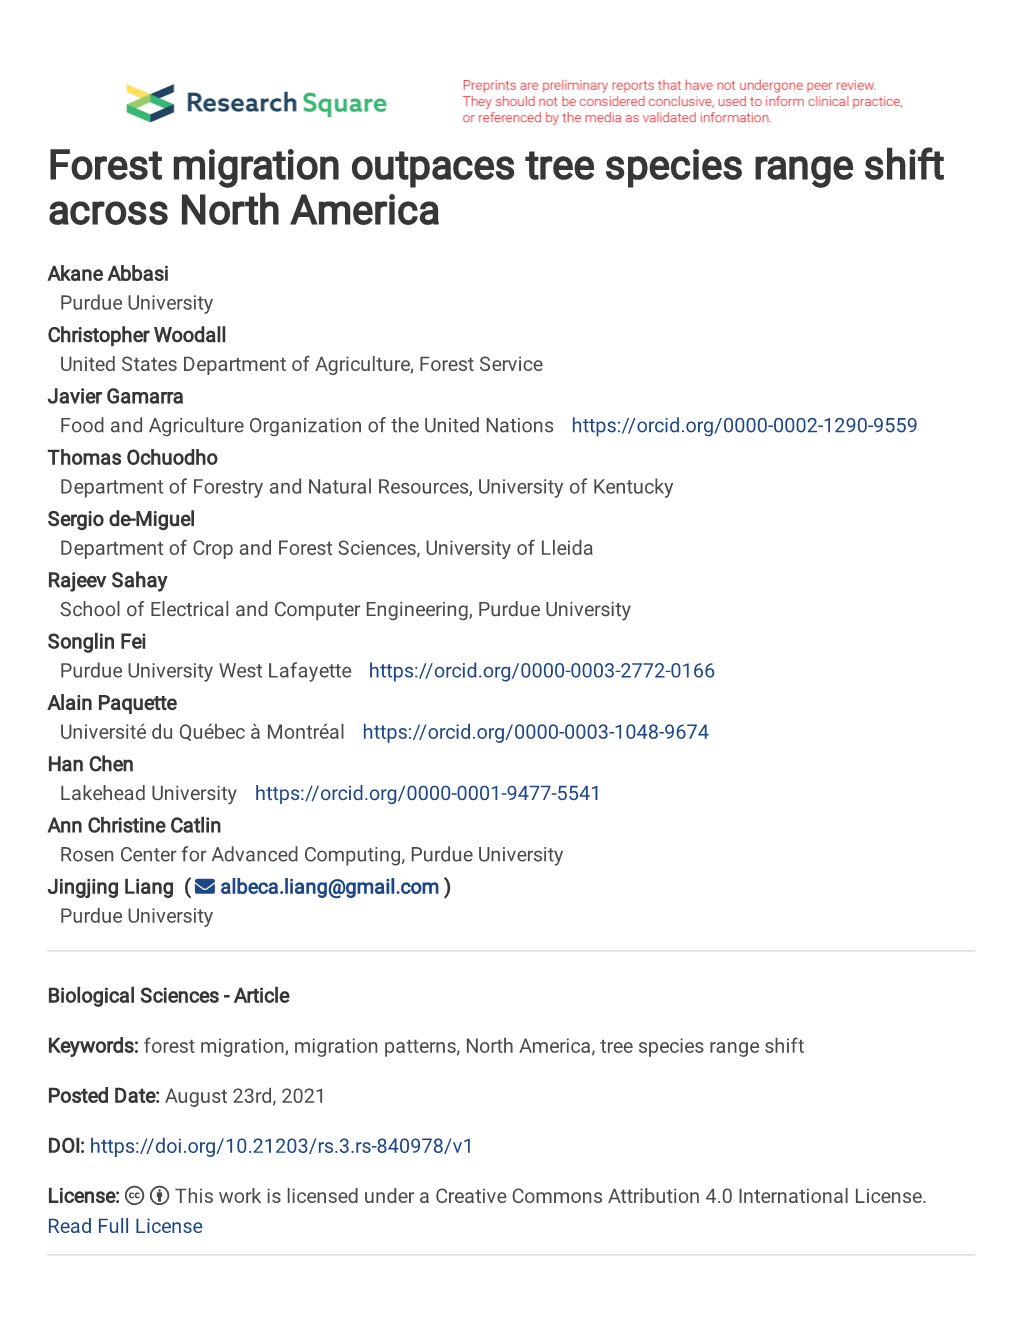 Forest Migration Outpaces Tree Species Range Shift Across North America